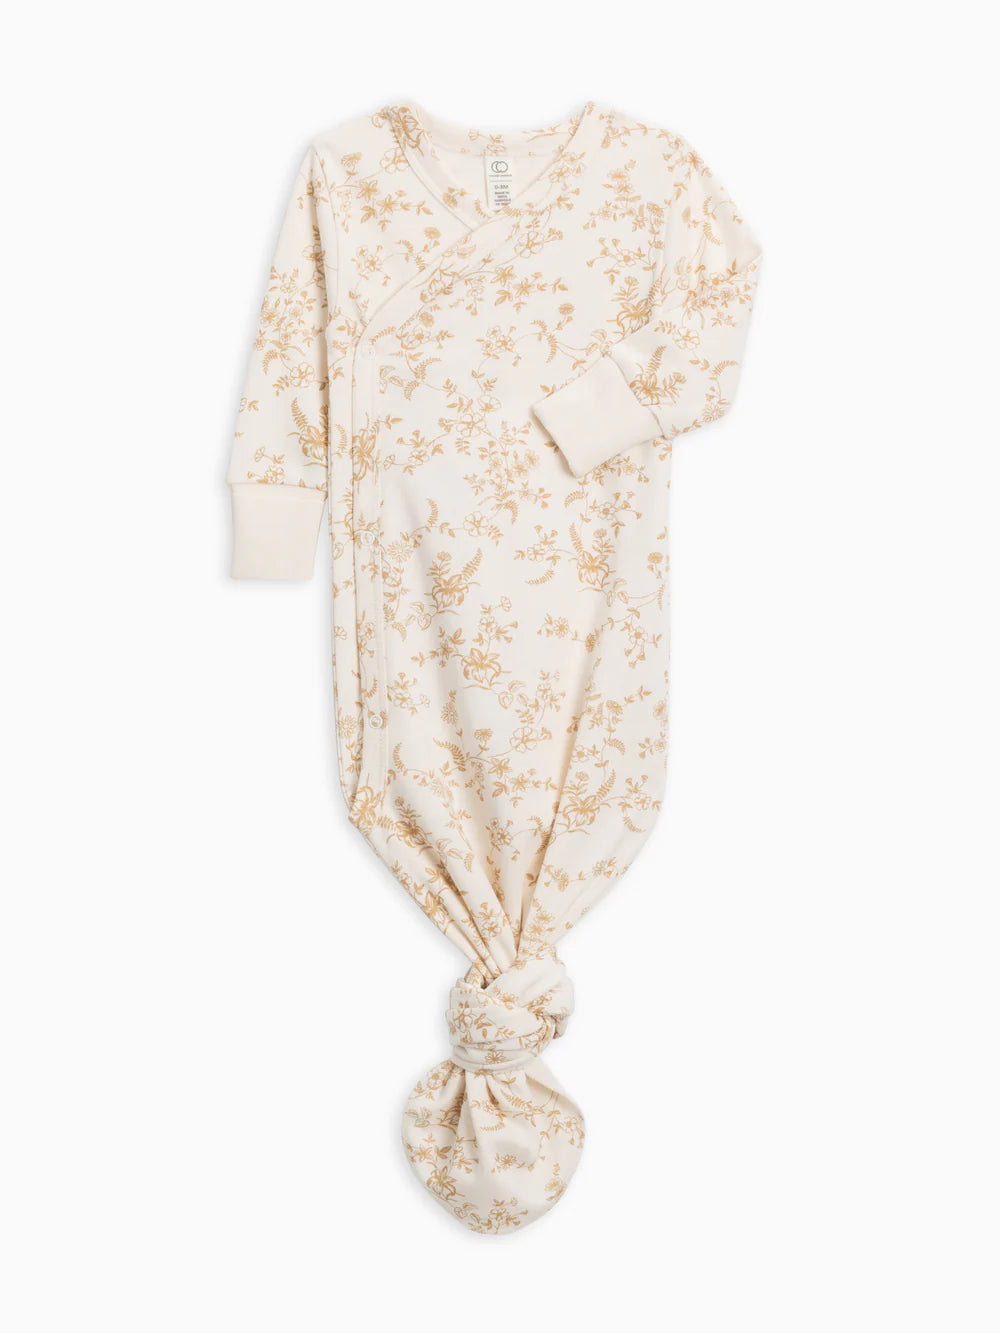 The Indy Floral Latte Baby Gown